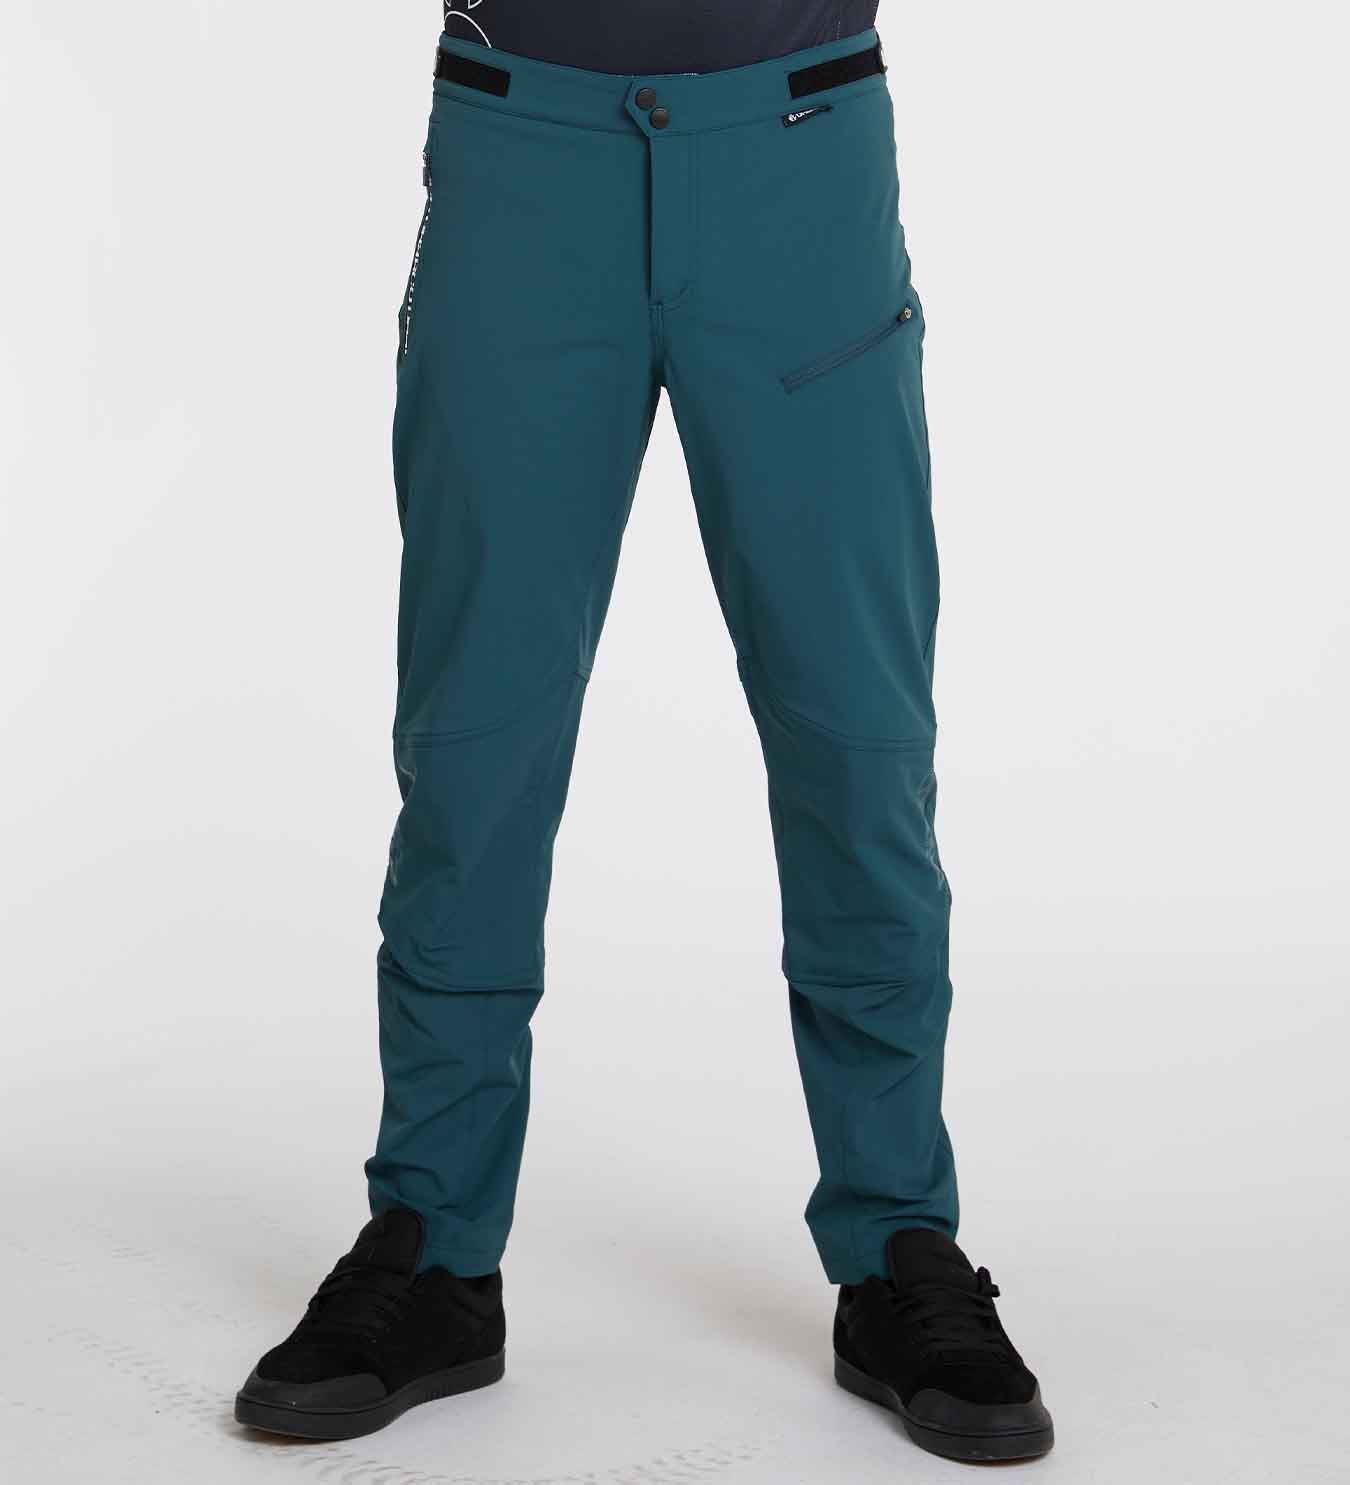 DHaRCO Mens Gravity Pants - Forest